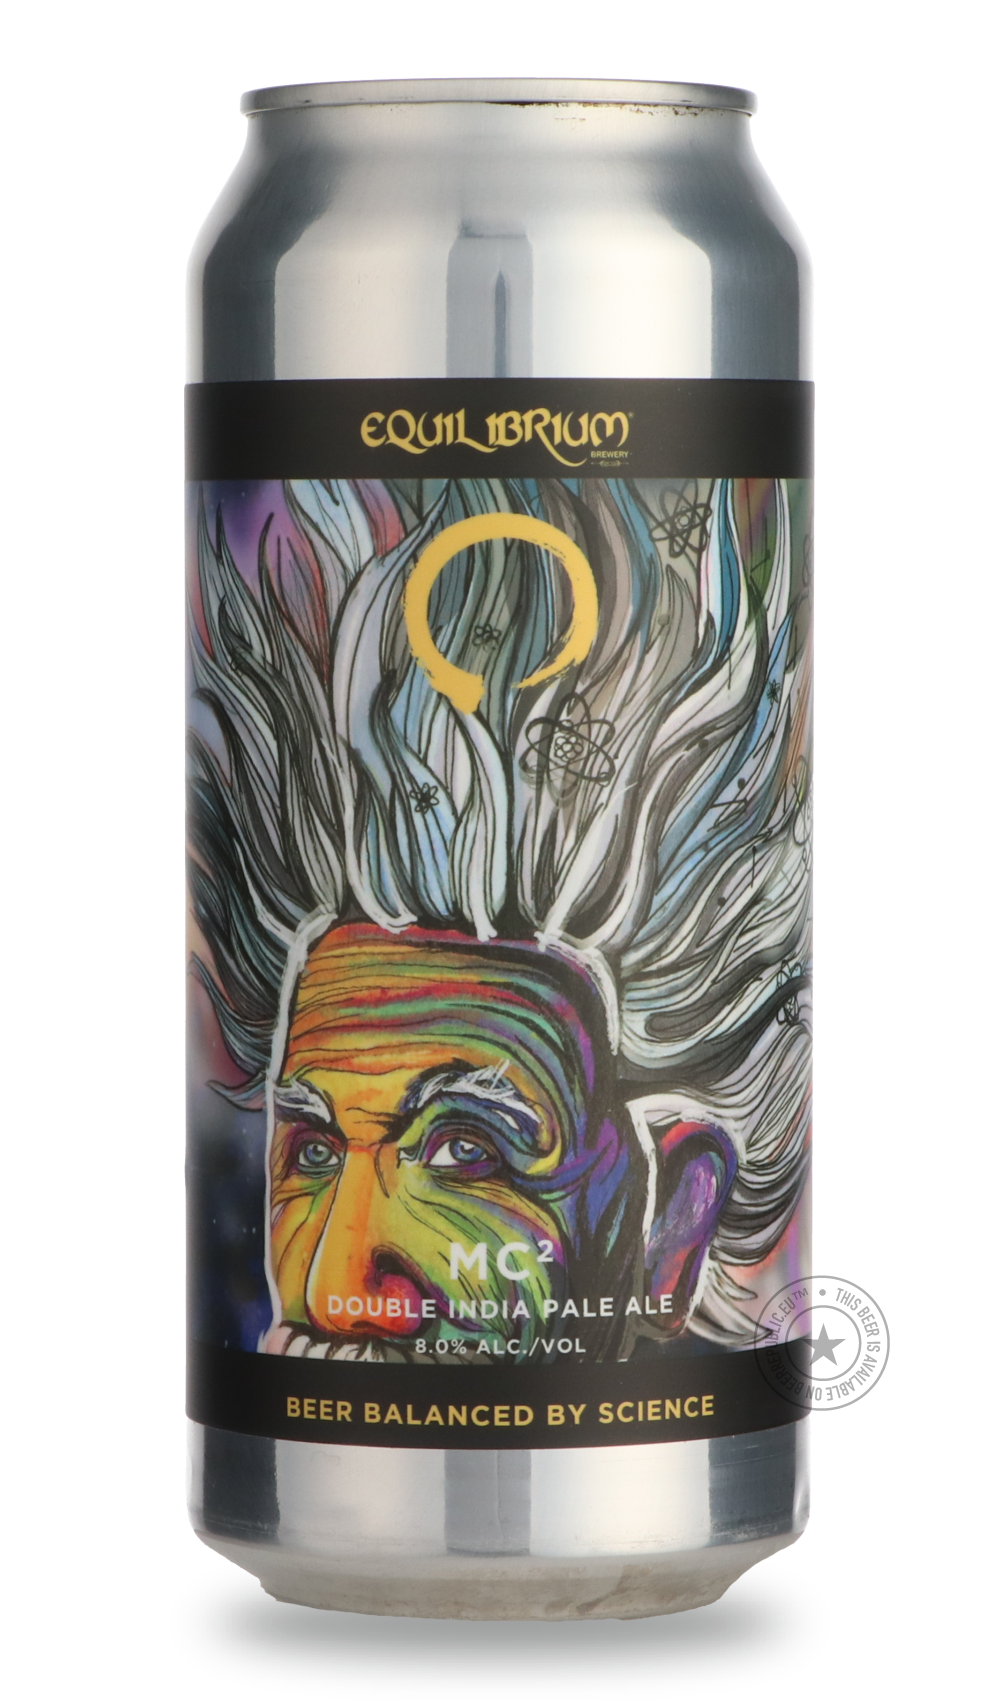 -Equilibrium- MC²-IPA- Only @ Beer Republic - The best online beer store for American & Canadian craft beer - Buy beer online from the USA and Canada - Bier online kopen - Amerikaans bier kopen - Craft beer store - Craft beer kopen - Amerikanisch bier kaufen - Bier online kaufen - Acheter biere online - IPA - Stout - Porter - New England IPA - Hazy IPA - Imperial Stout - Barrel Aged - Barrel Aged Imperial Stout - Brown - Dark beer - Blond - Blonde - Pilsner - Lager - Wheat - Weizen - Amber - Barley Wine - Q